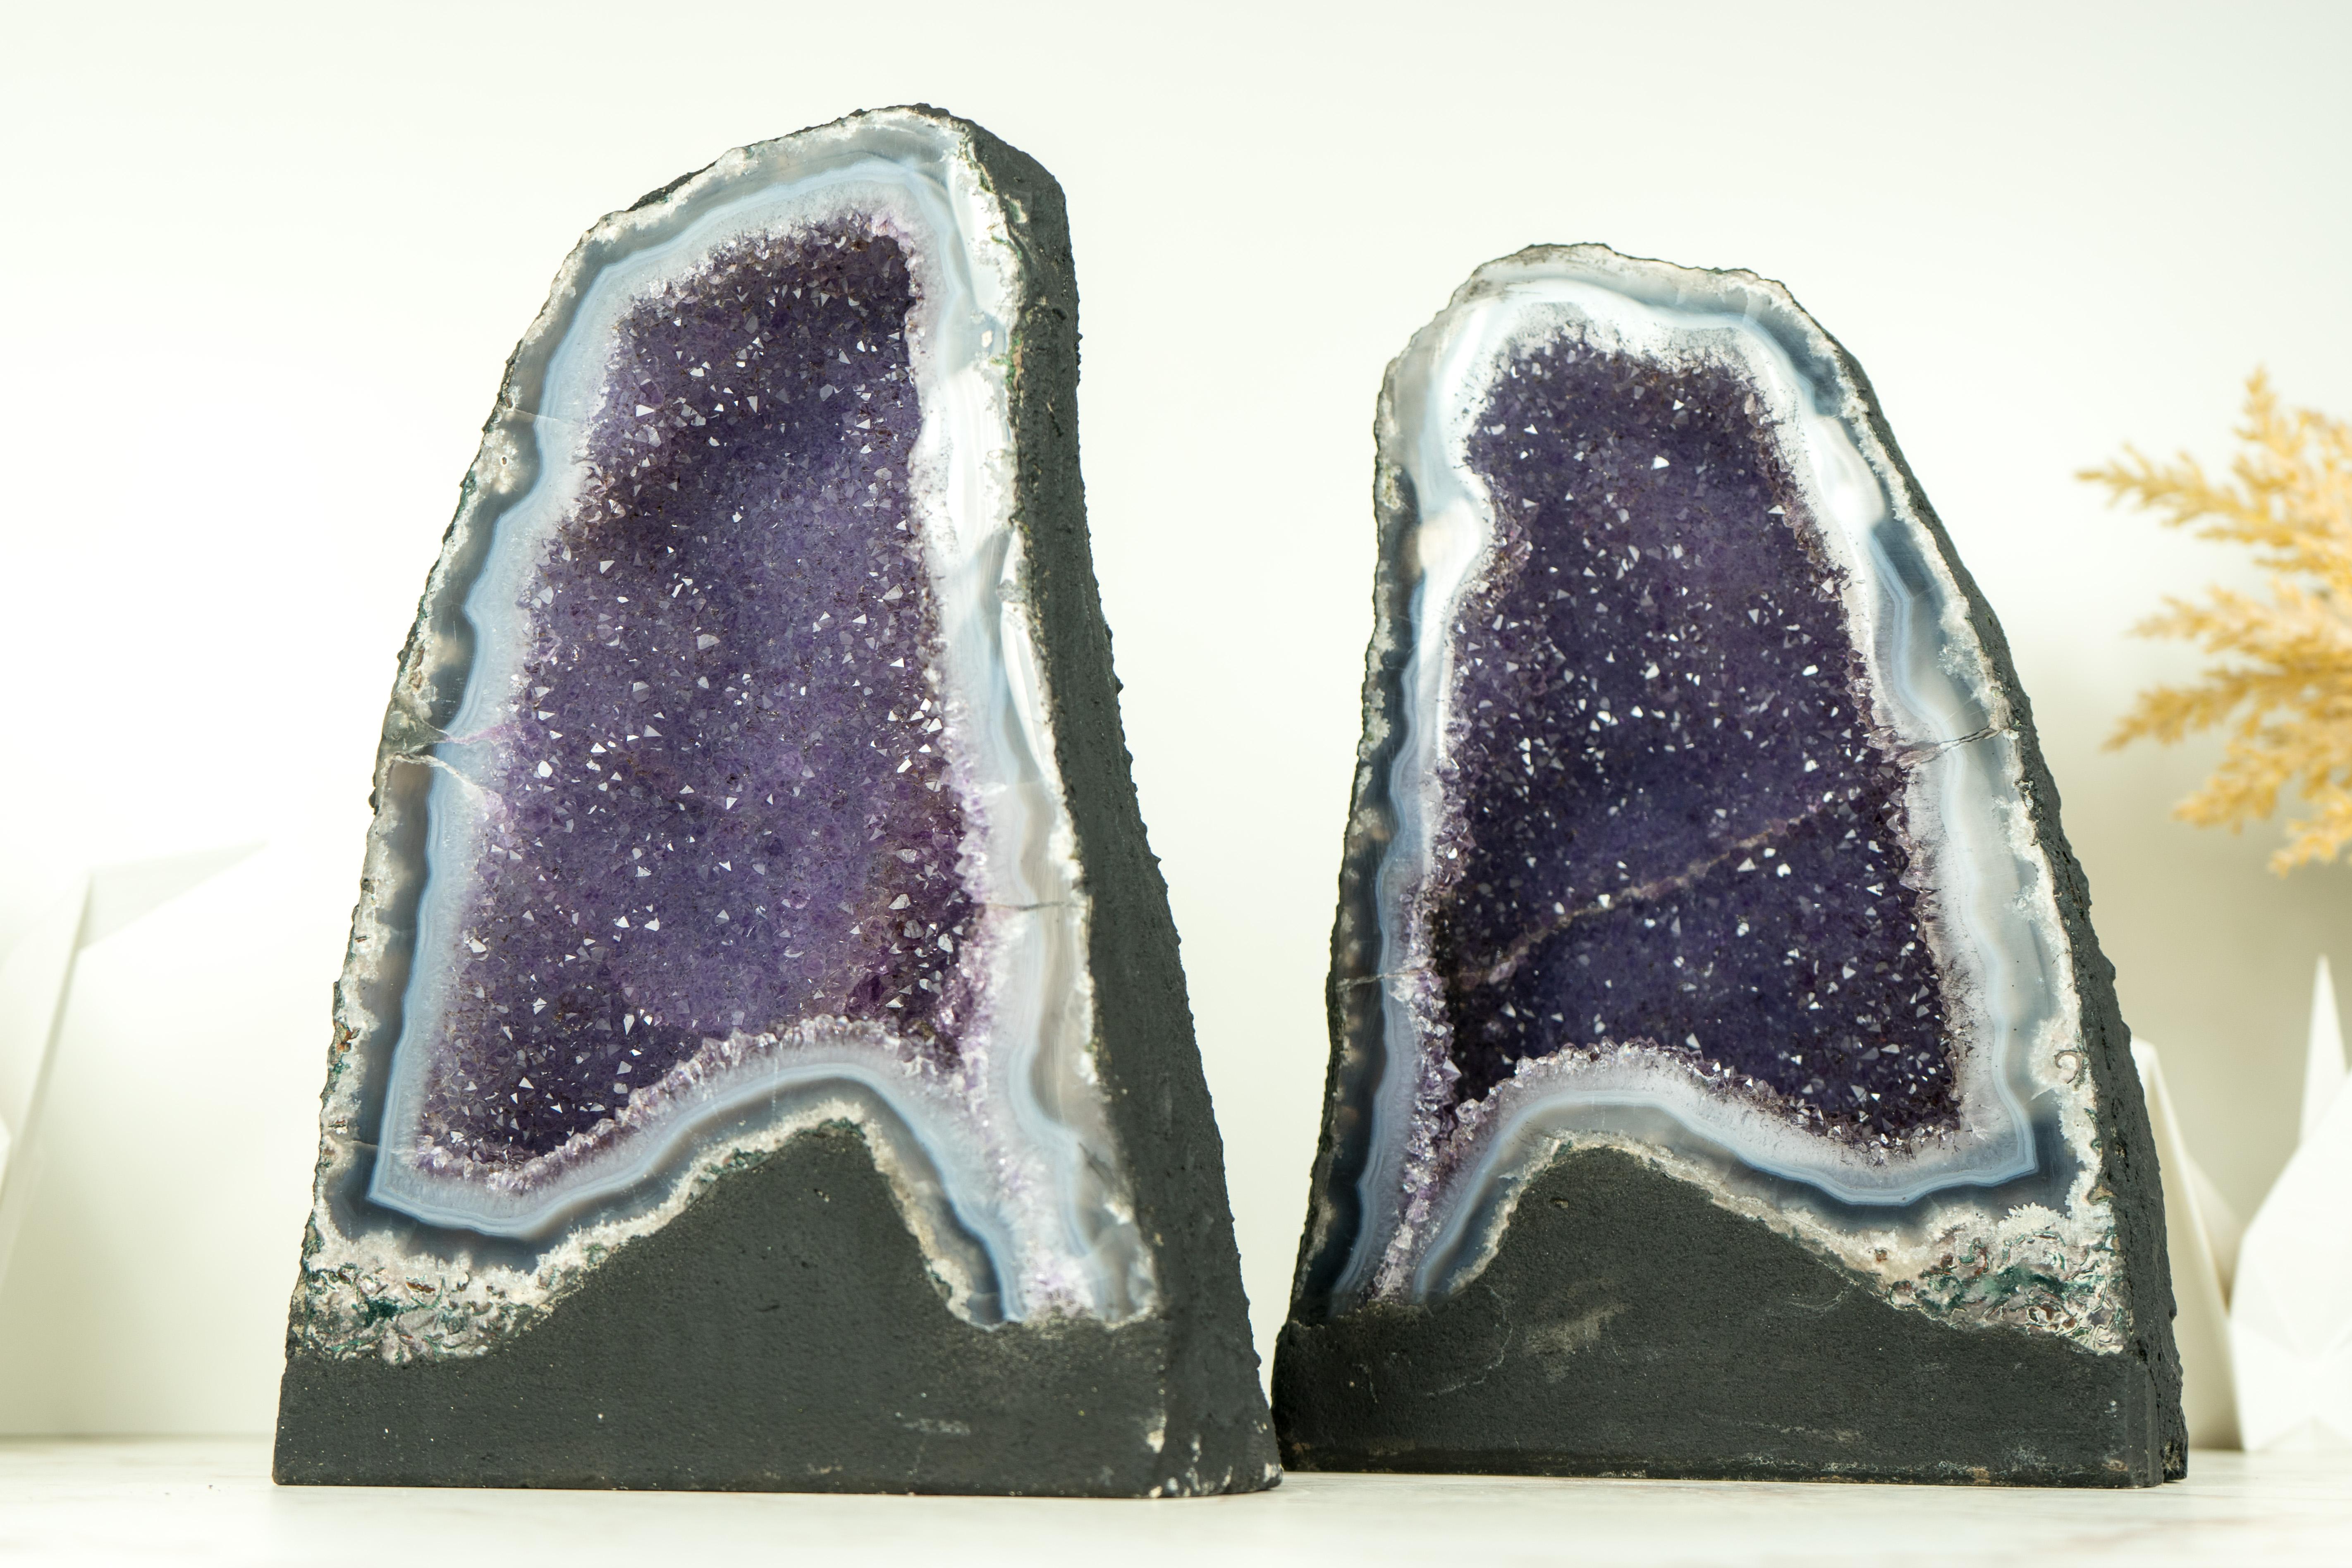 Pair of High-Grade Small Blue Lace Agate Geodes with Sparkly Lavender Amethyst For Sale 1